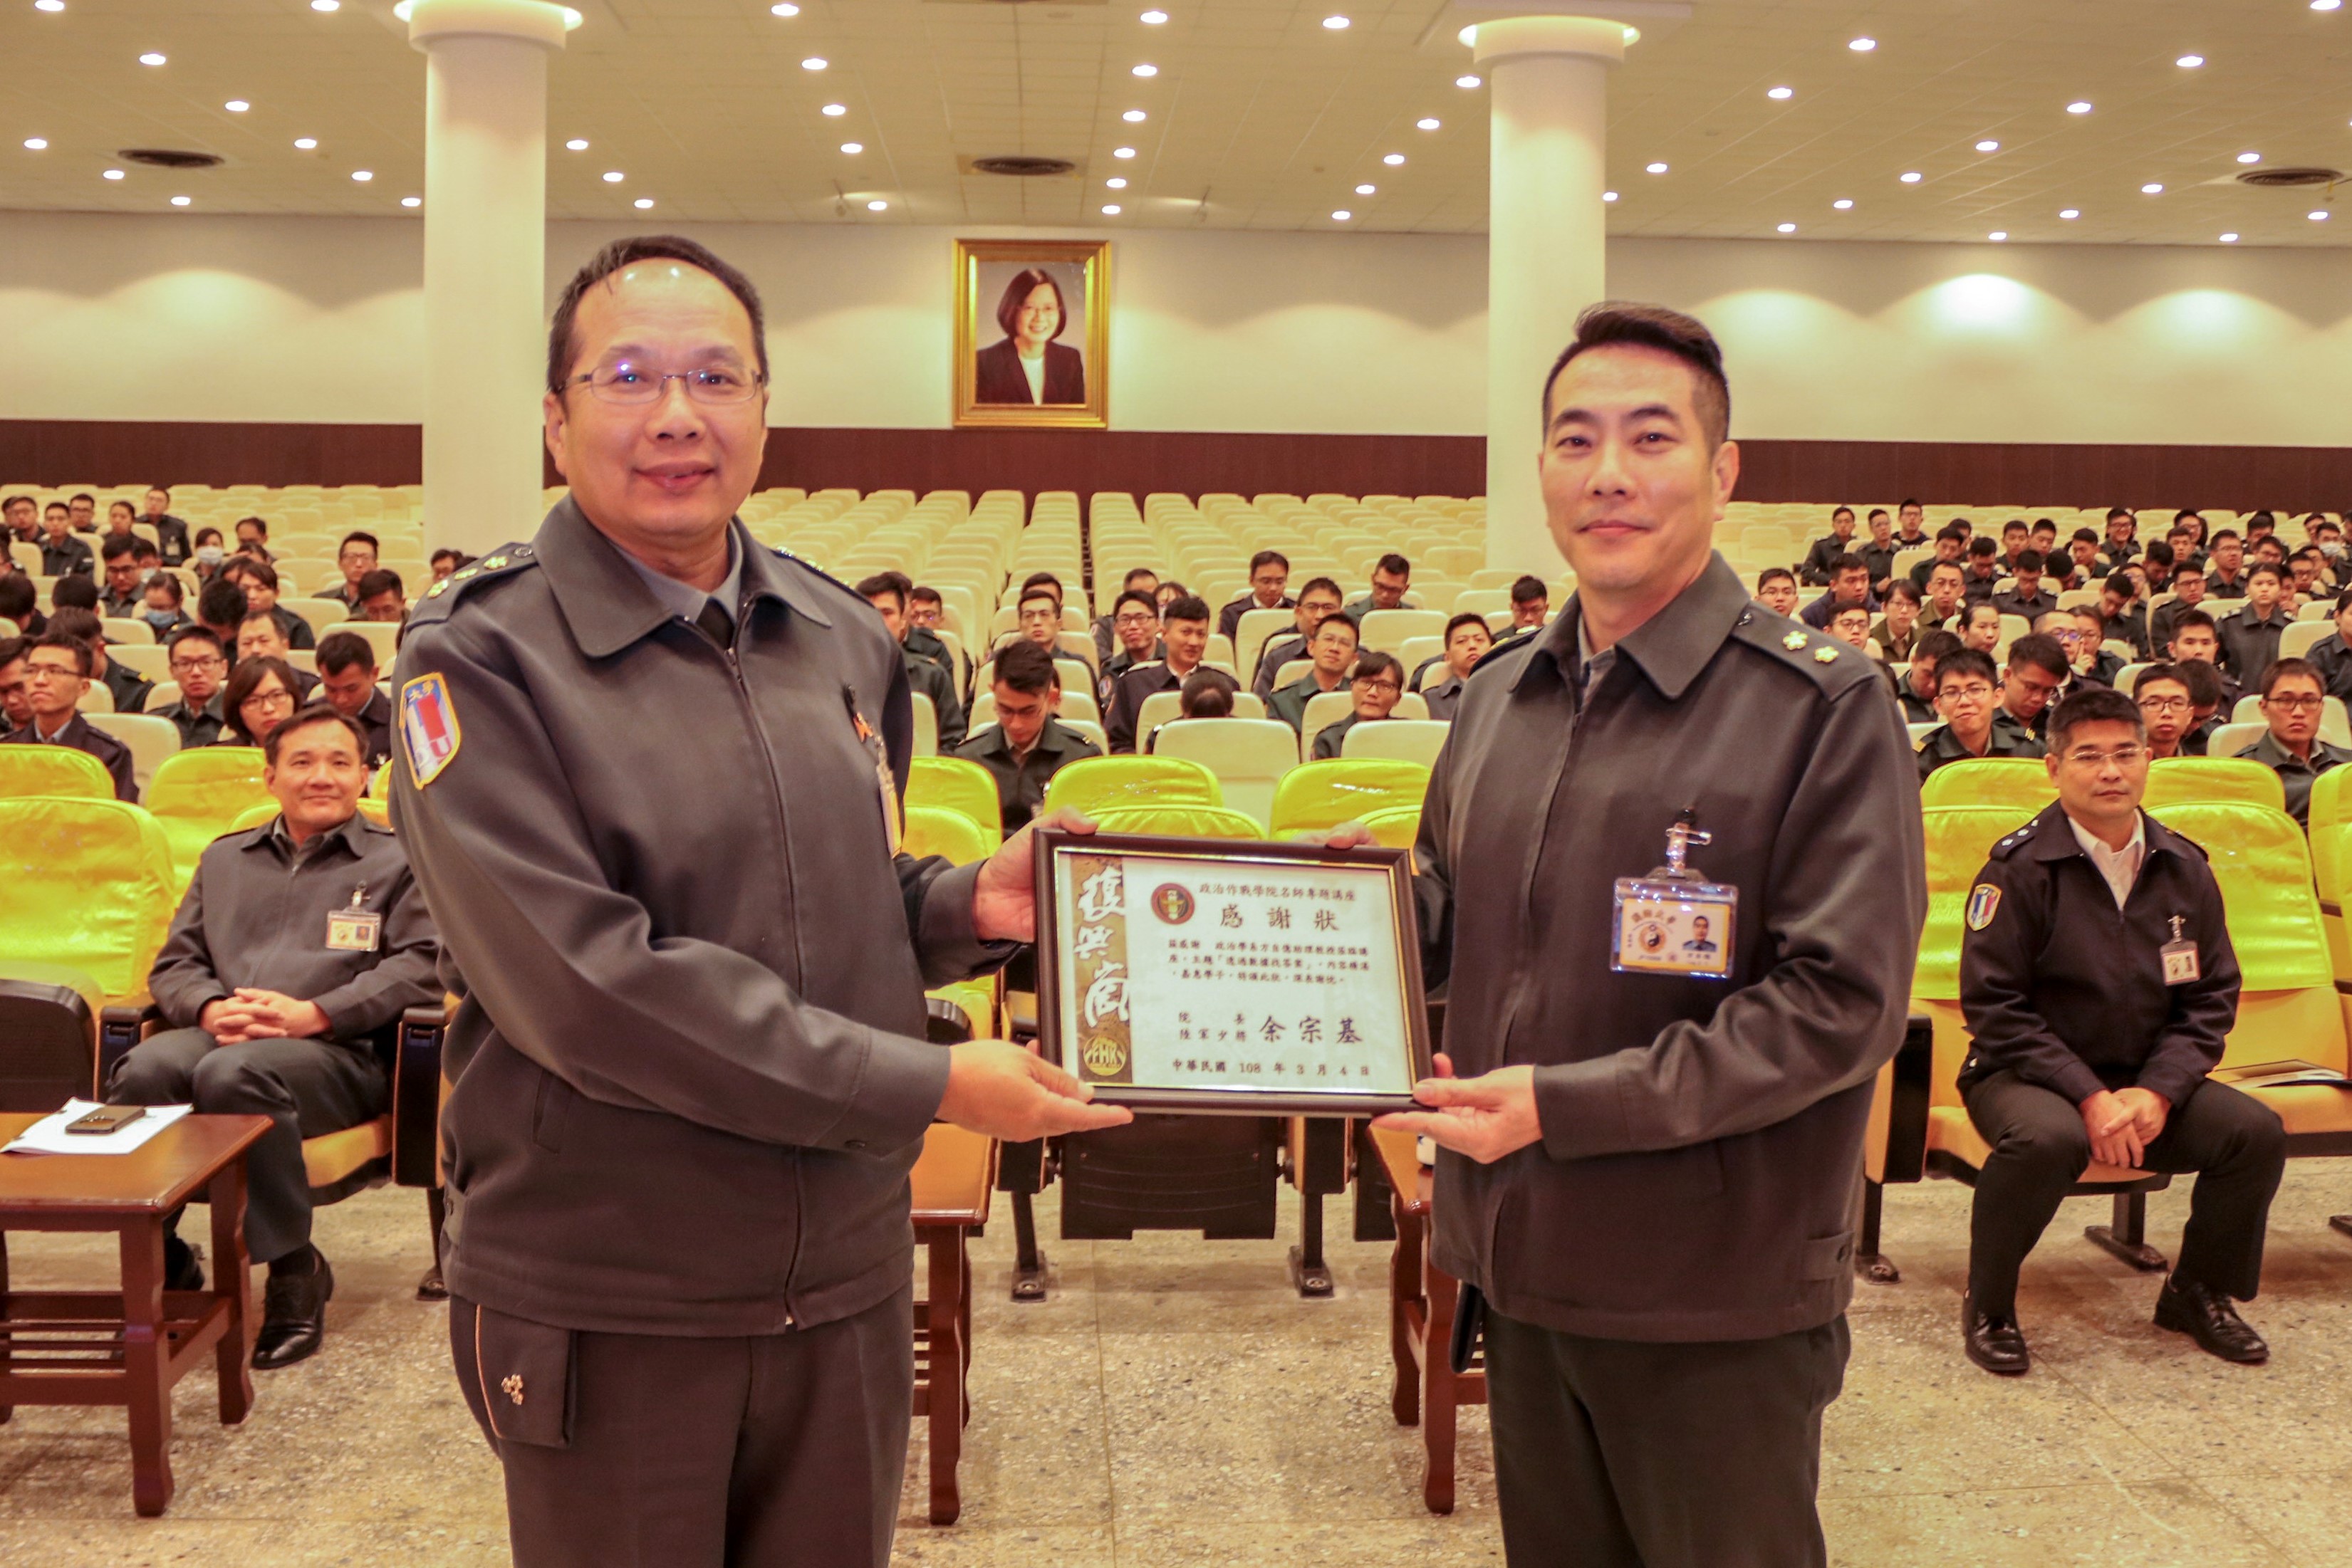 Col. Chen gave the certificate of appreciation after speech.